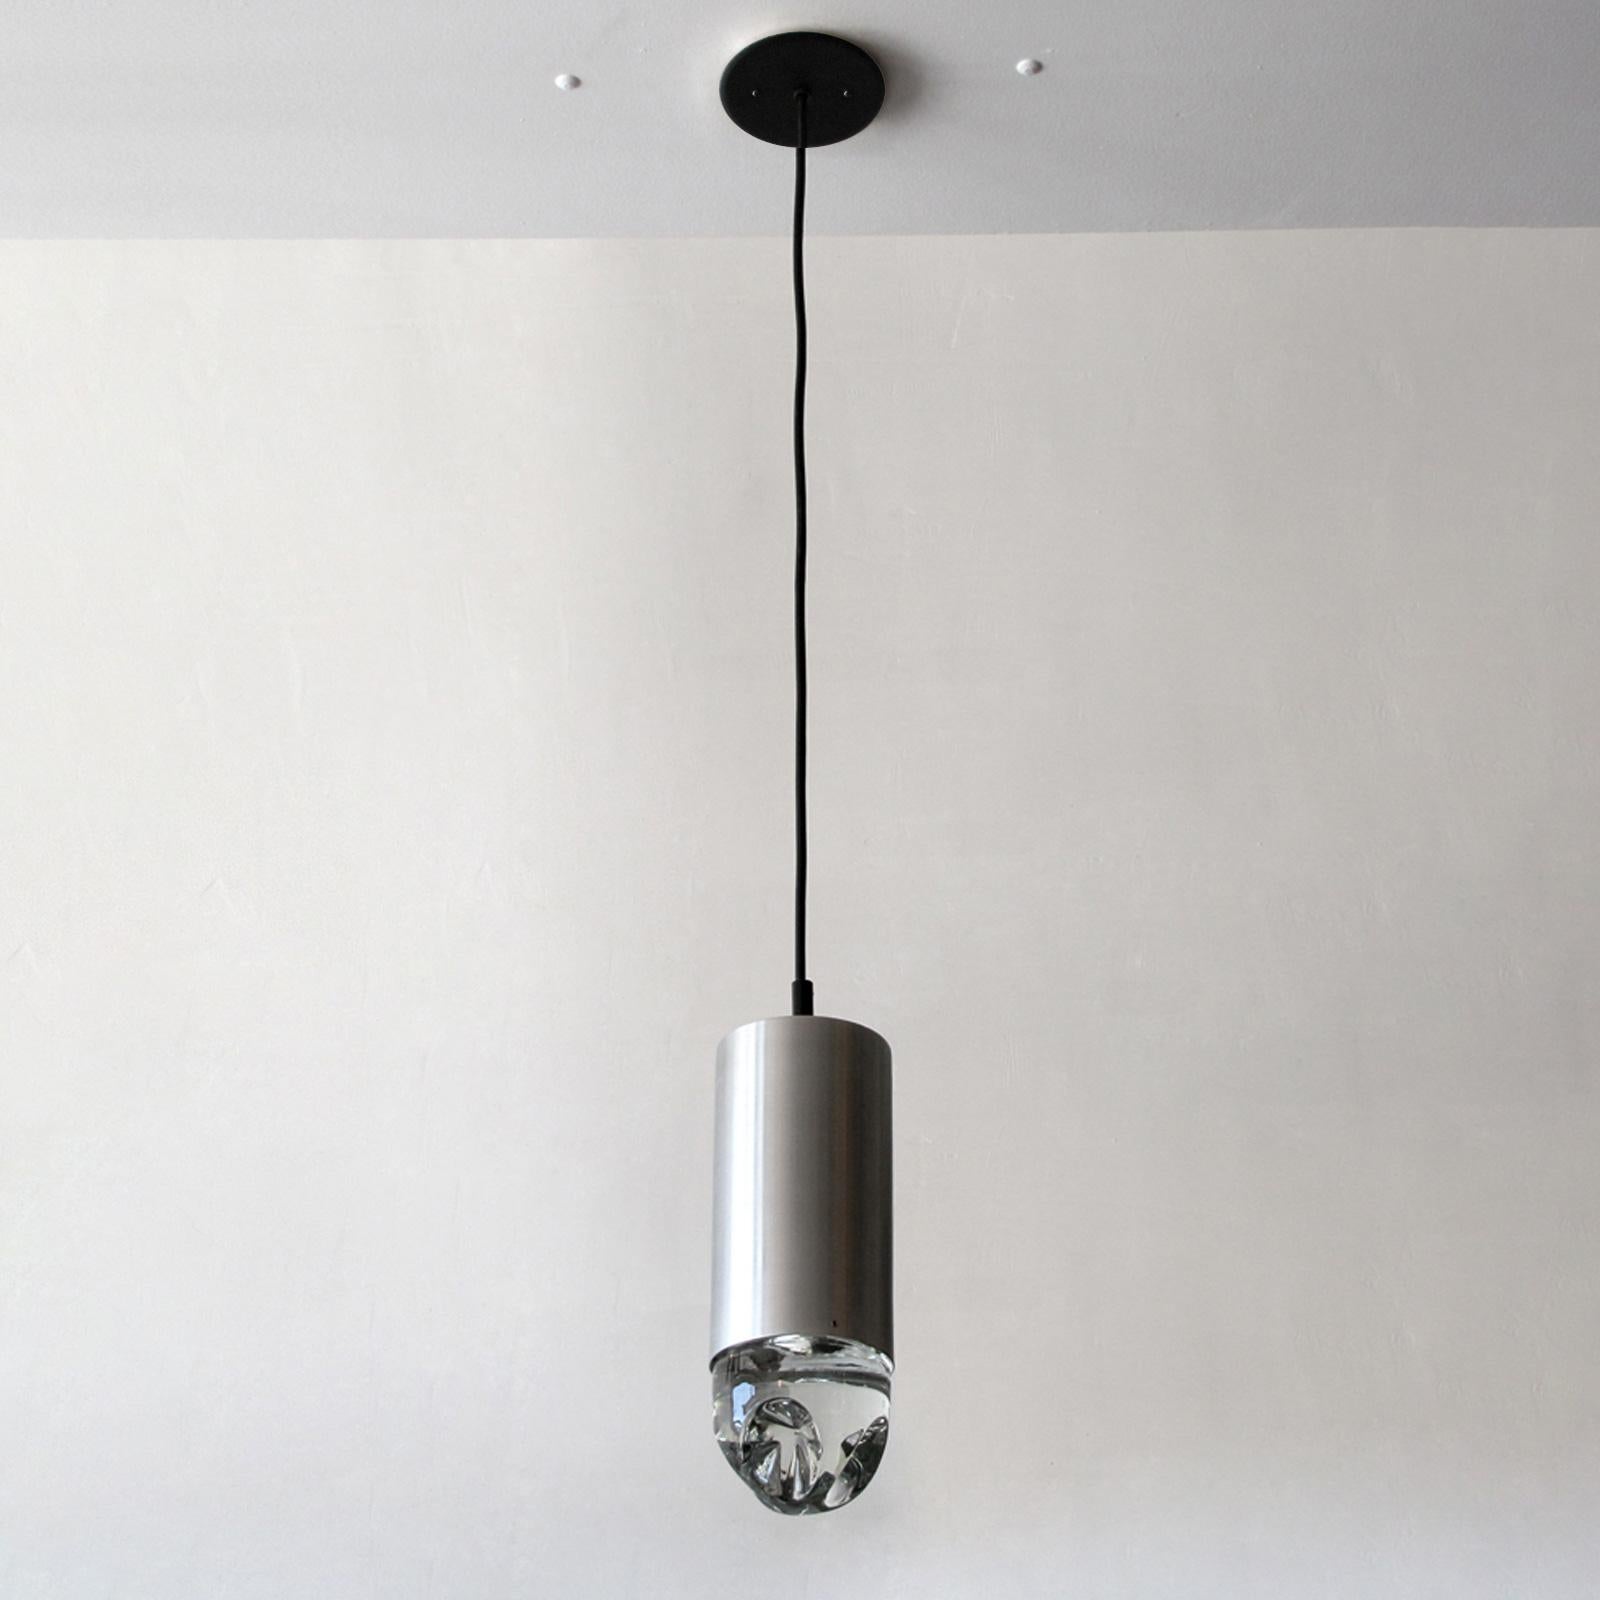 Stunning pendant lights with solid glass bodies suspended from an aluminum cylinder by RAAK, Holland, total drop is fully adjustable on request. Priced individually.